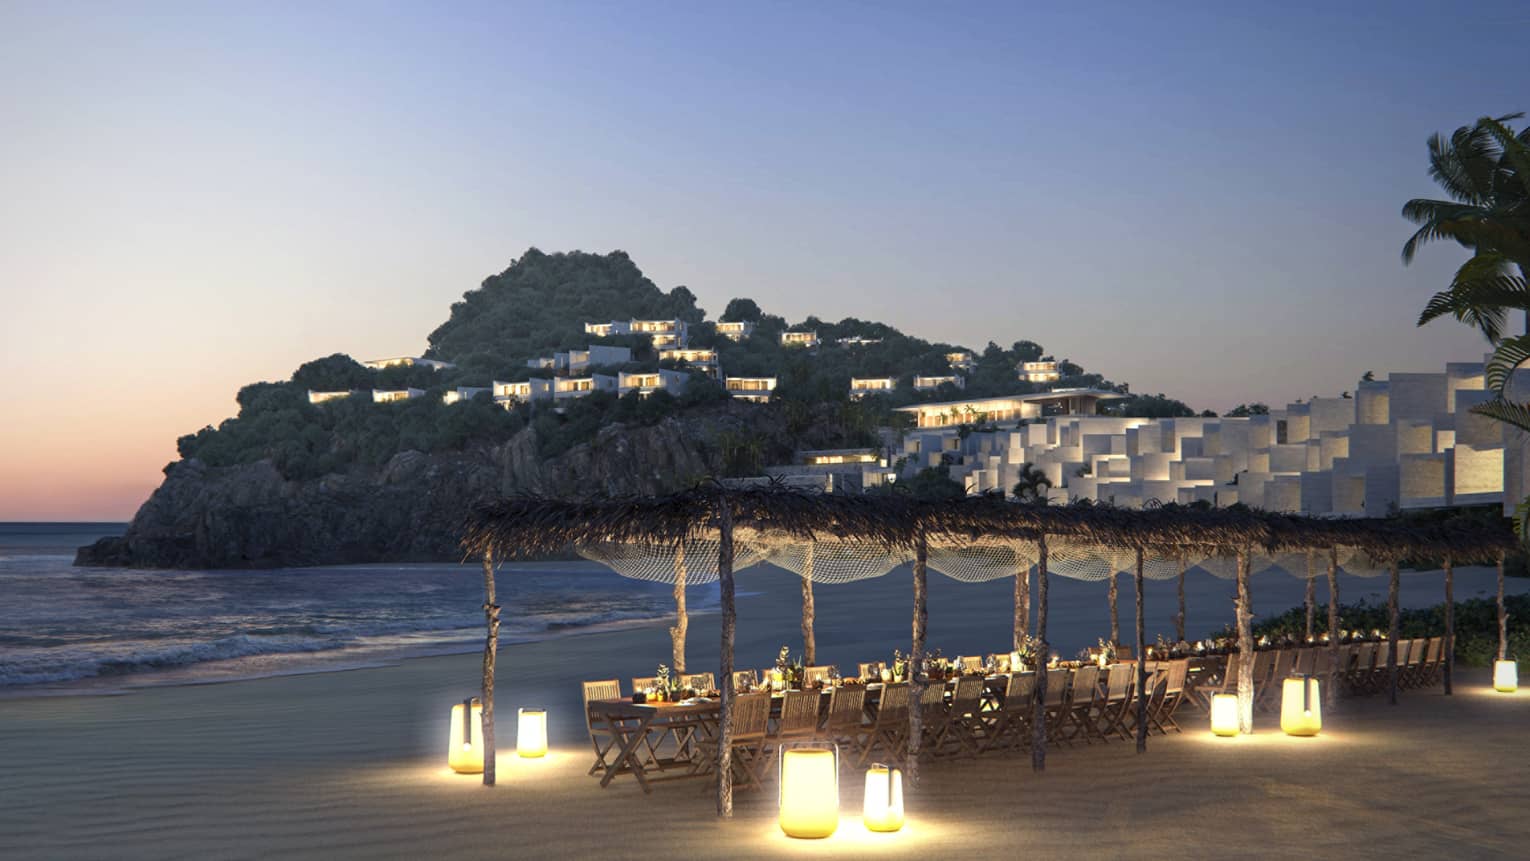 Long table set for private event on the beach